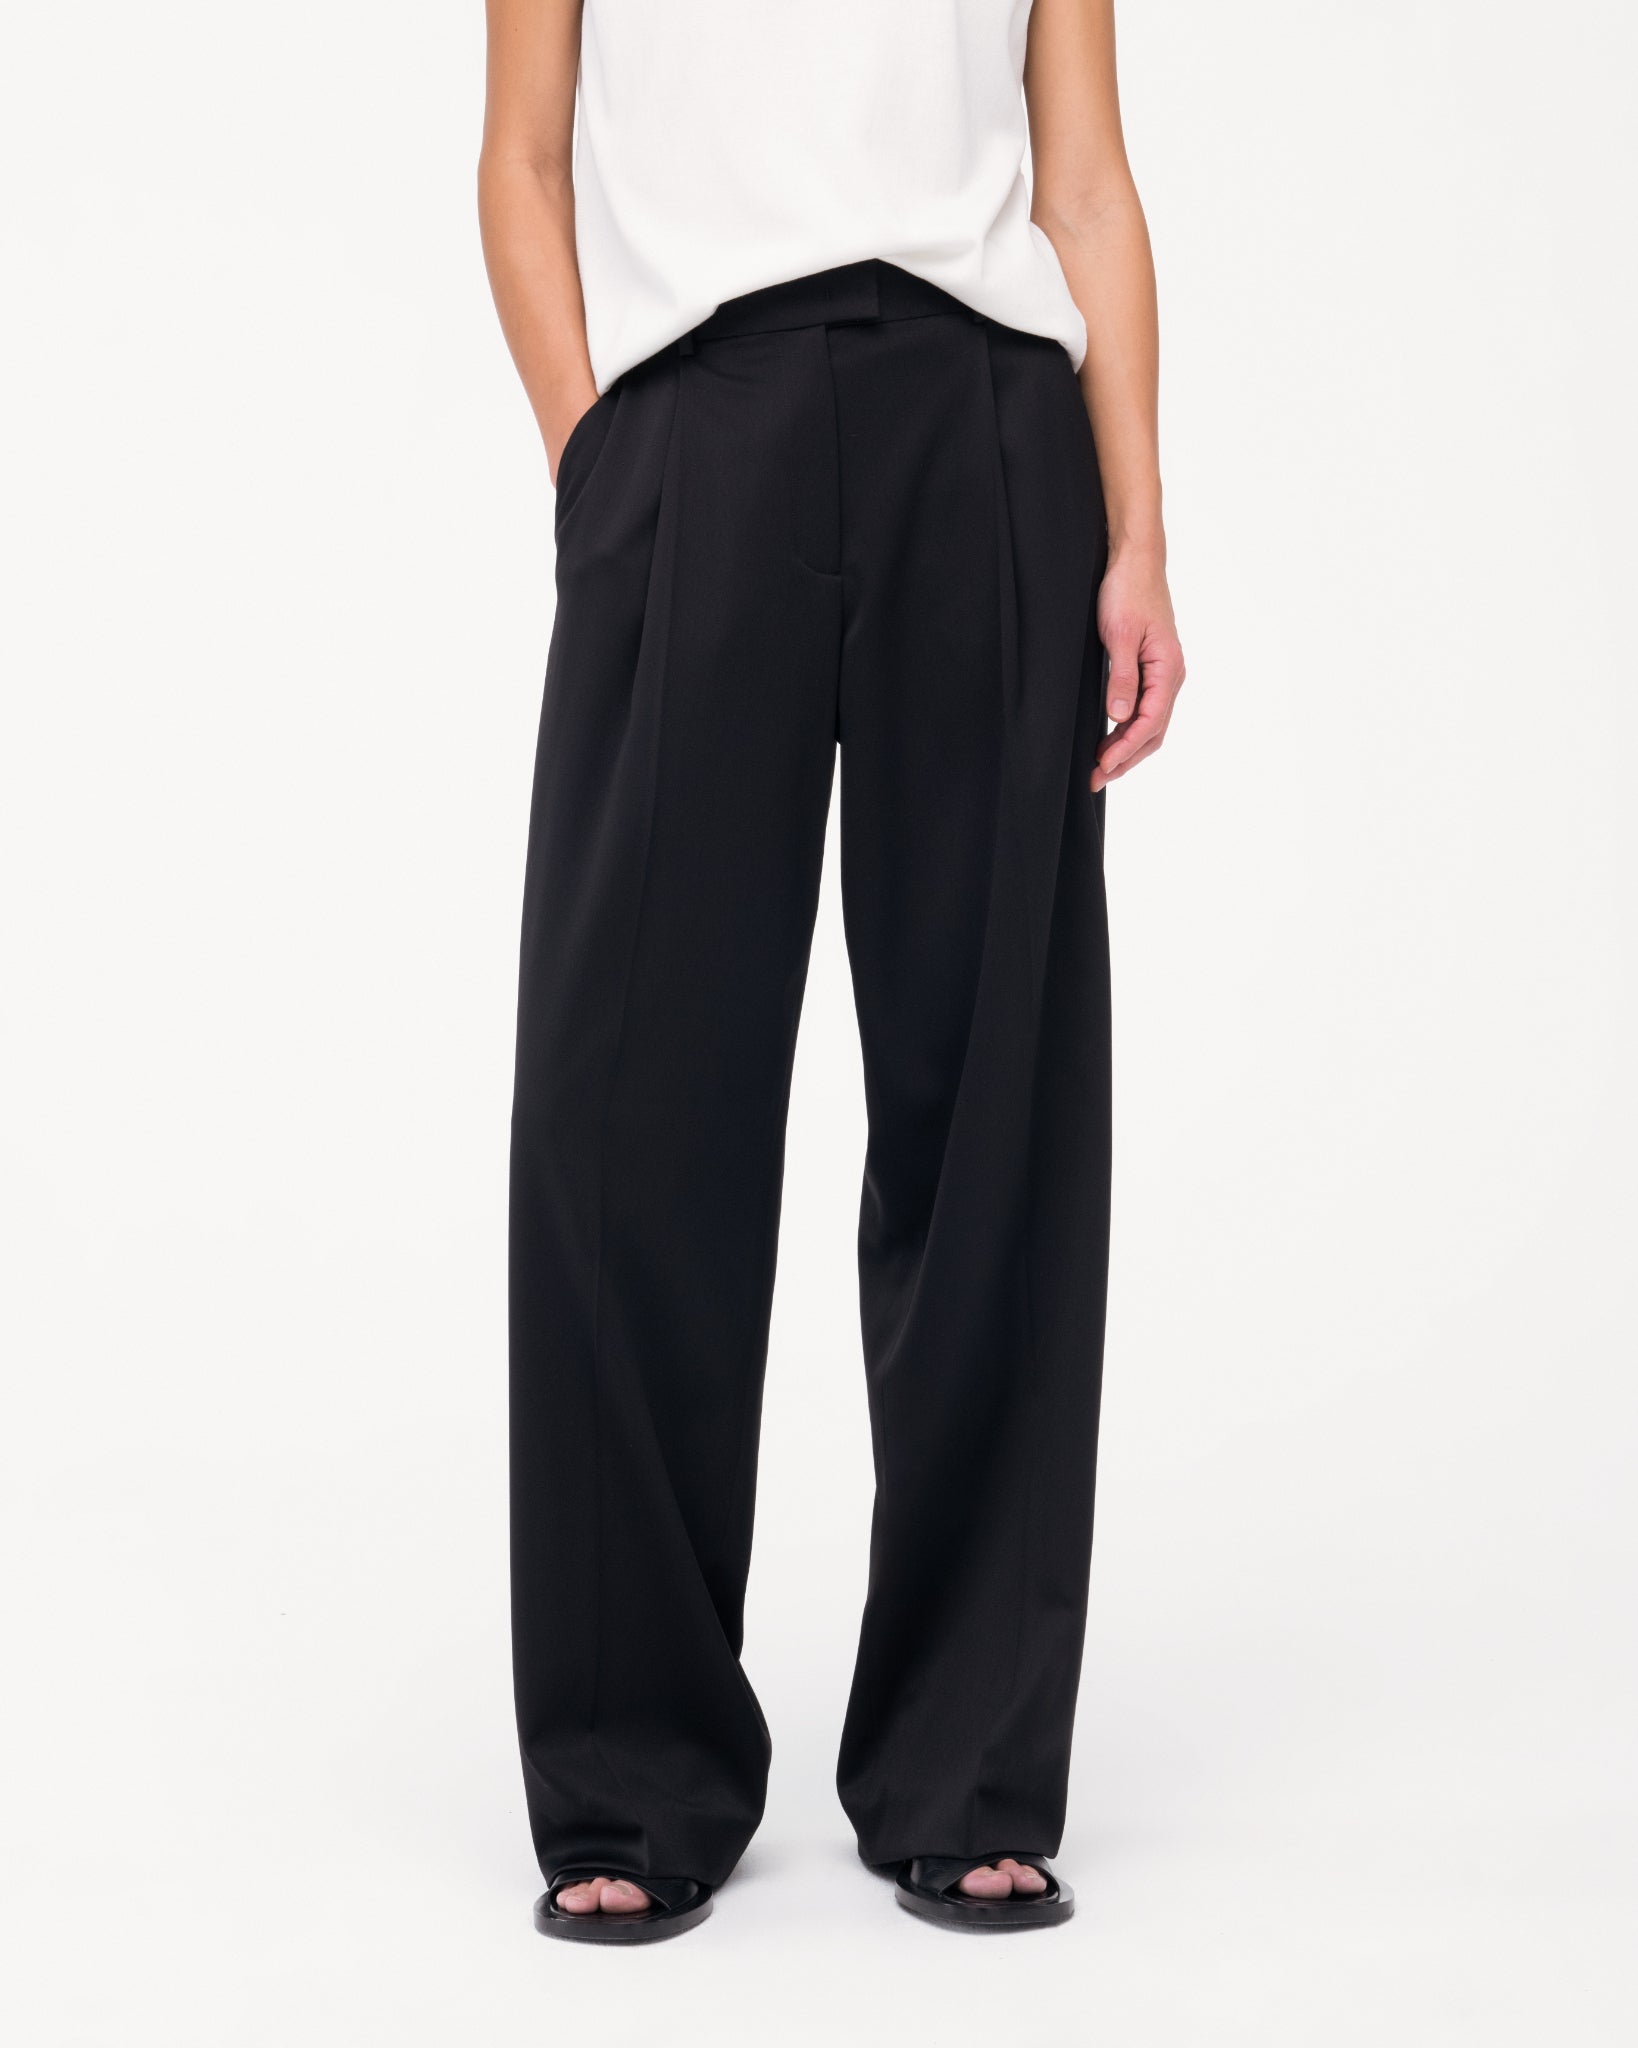 Relaxed Wide Leg Pant